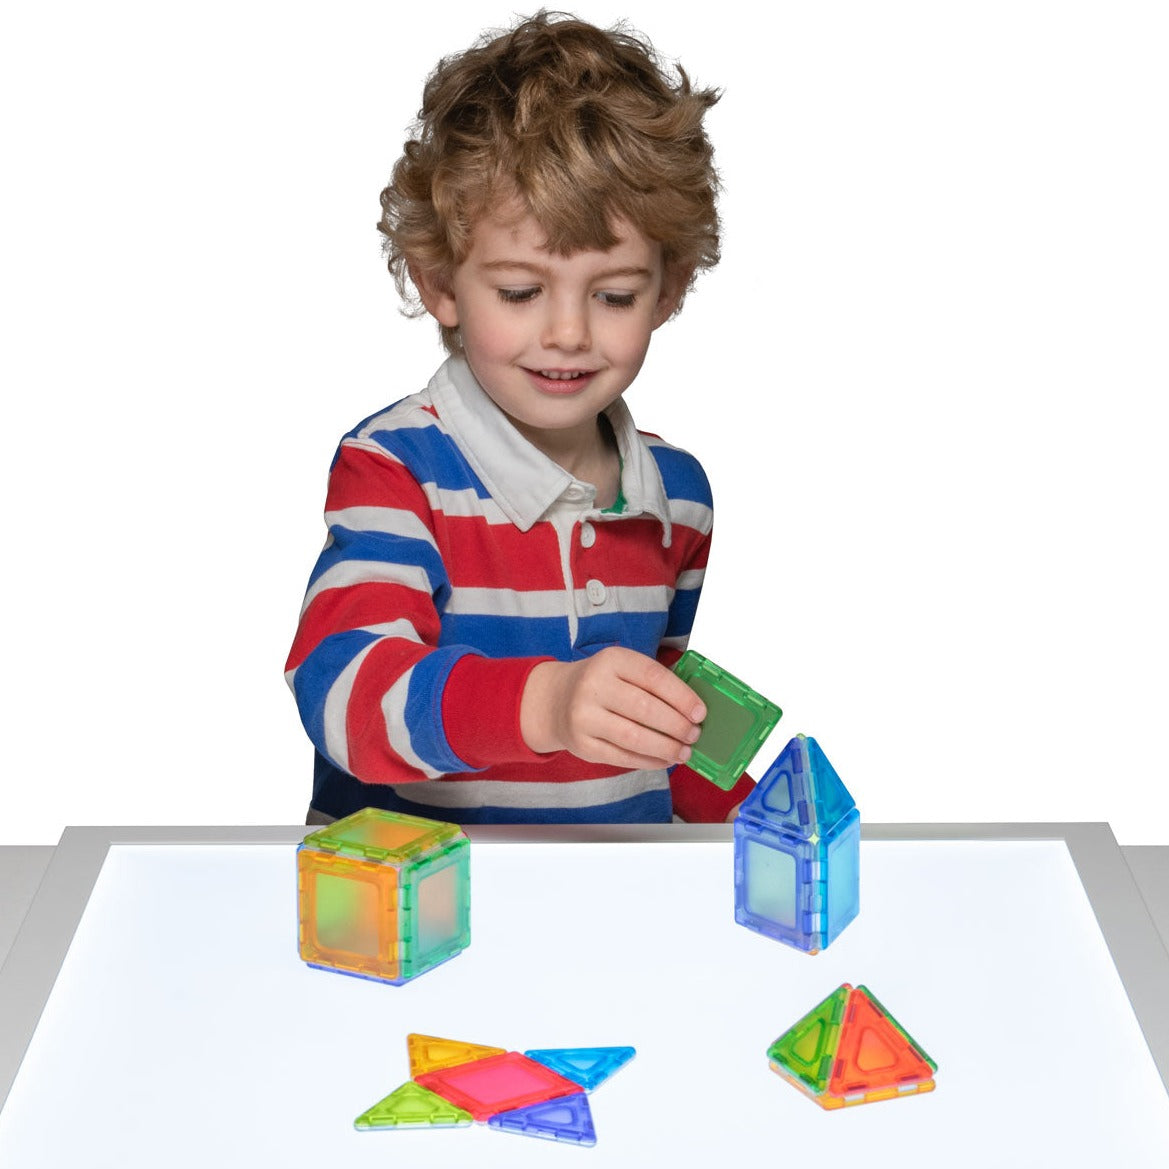 Translucent Solid Magnetic Polydron Starter Set, Introduce young learners to the wonders of shape and construction with the Translucent Solid Magnetic Polydron Starter Set. Designed for small groups of children, this set is perfect for those taking their first steps in building both 2D and 3D shapes.Supplied in 5 mesmerizing translucent colors, these translucent solid pieces capture the imagination and make learning even more exciting. The set is made from MABS material, ensuring durability and longevity fo